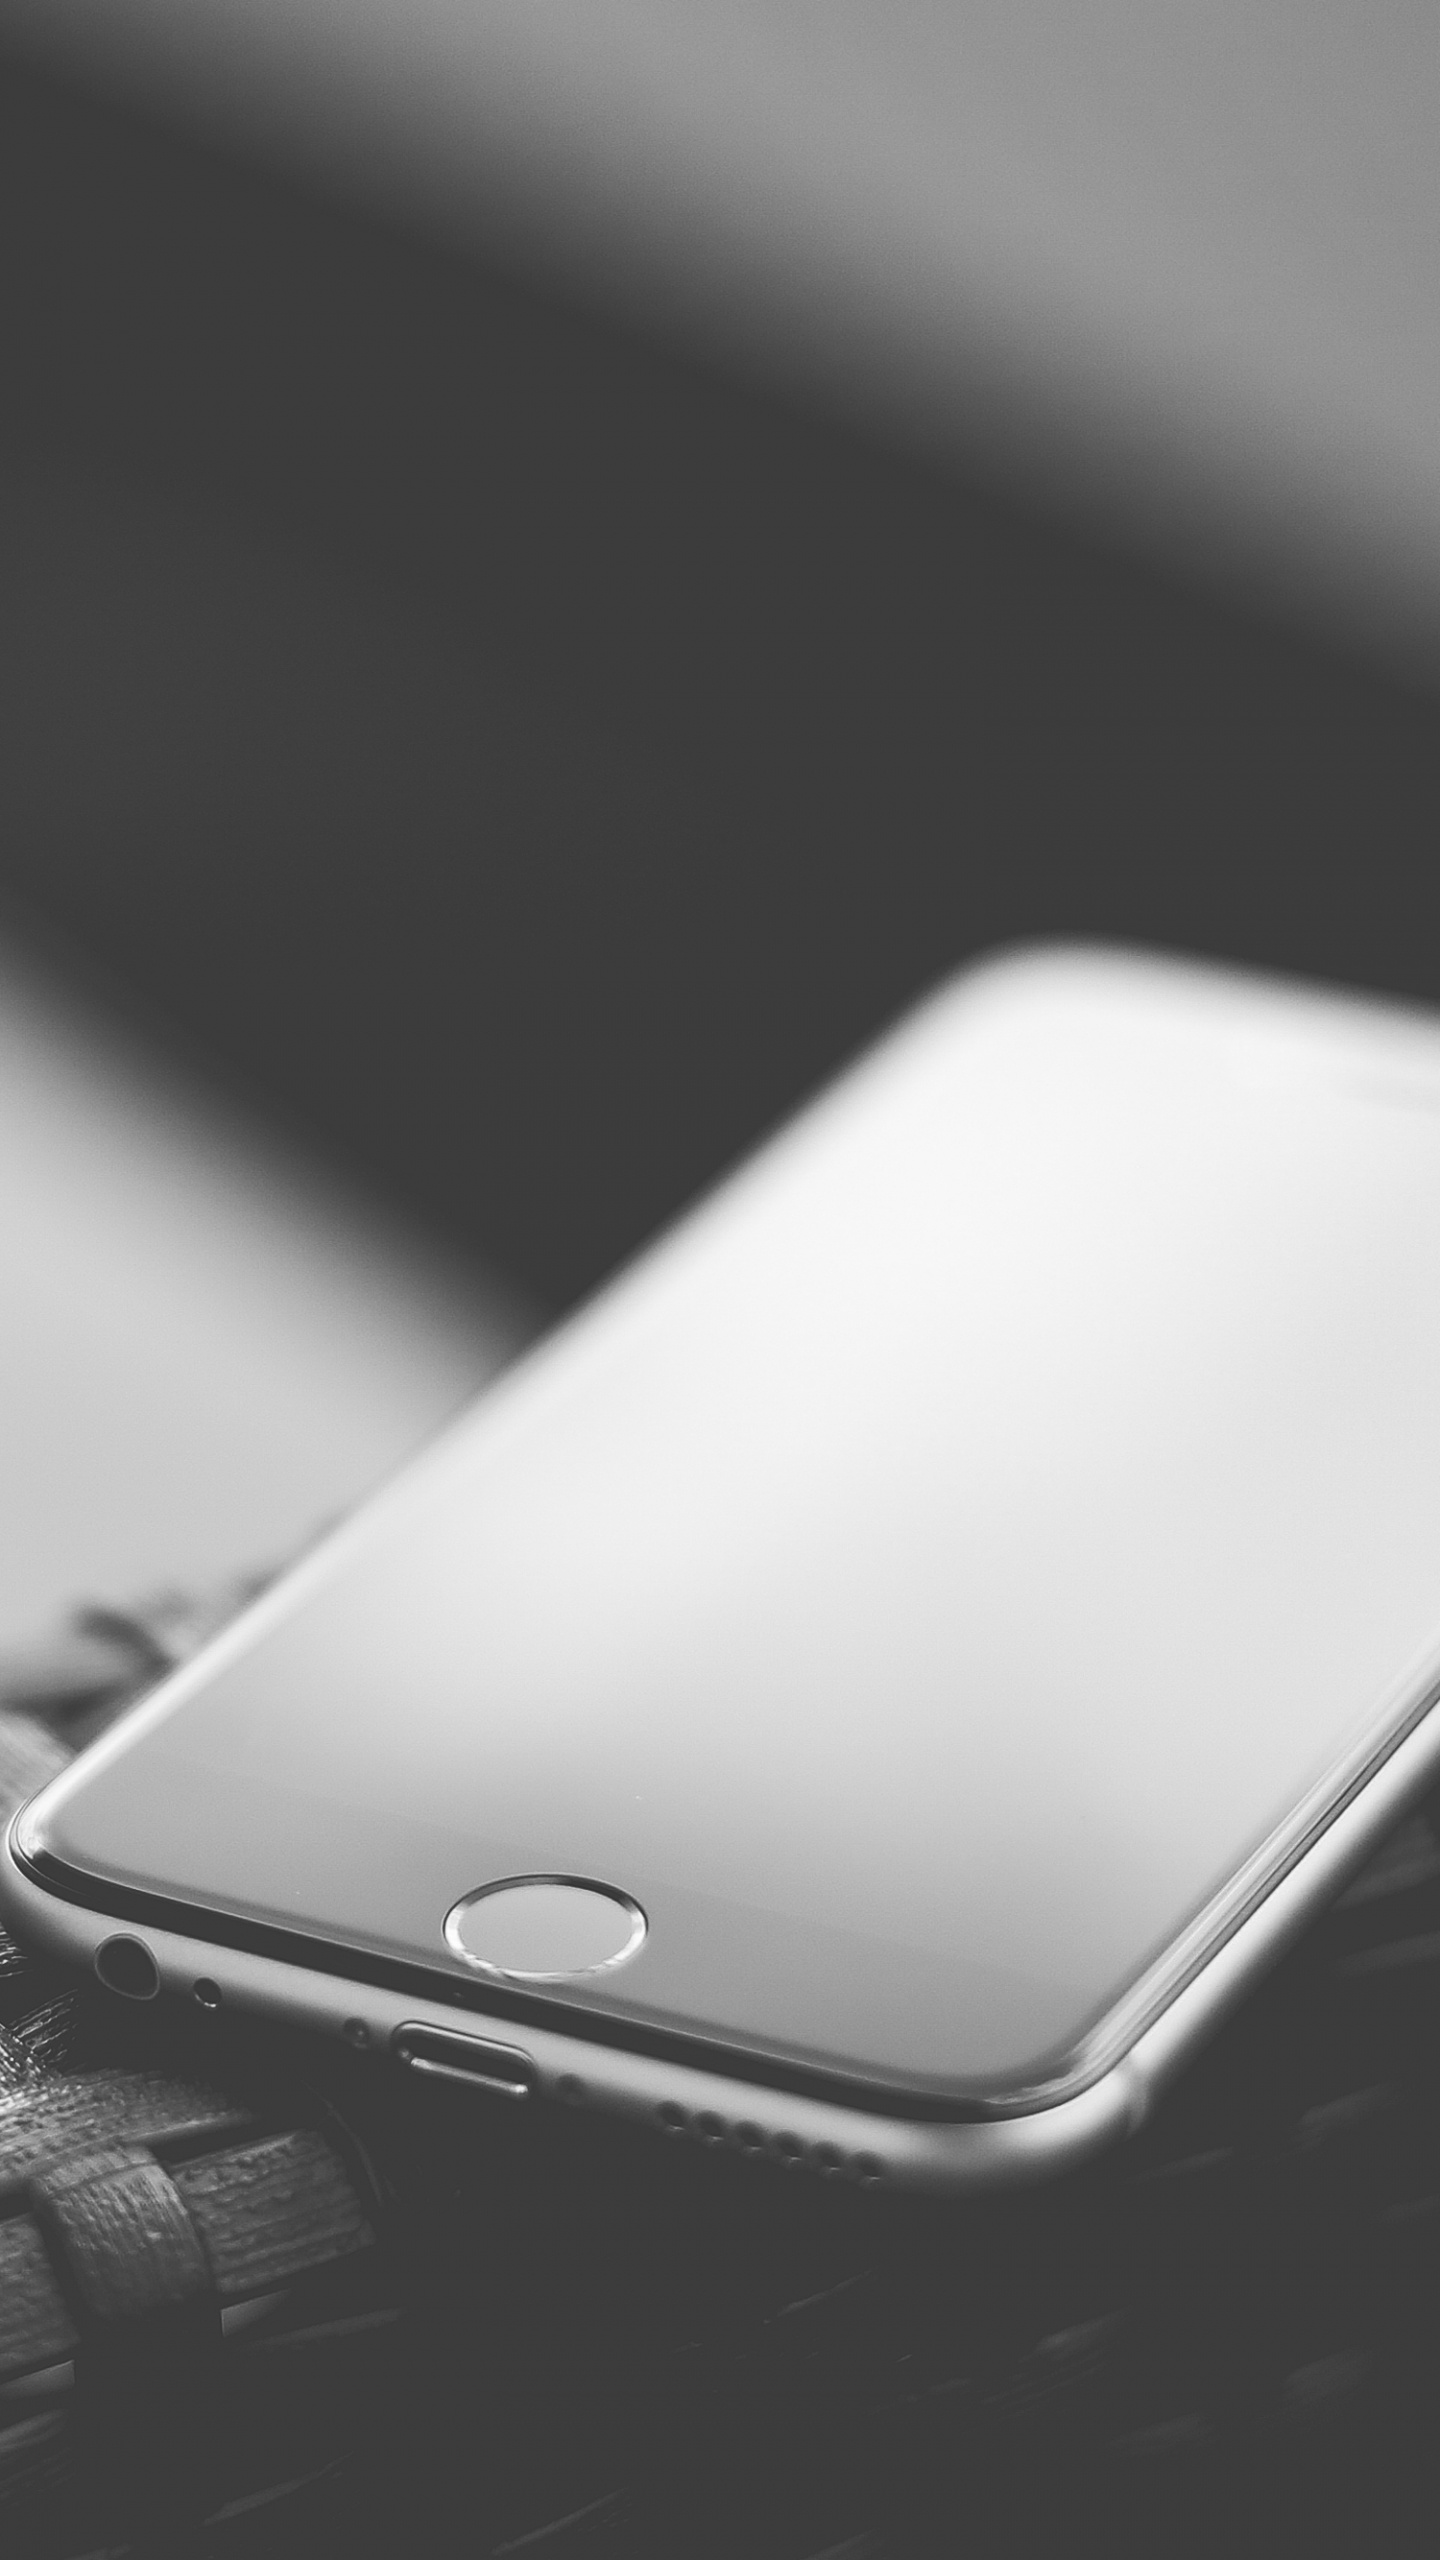 White Iphone 5 c on White Textile. Wallpaper in 1440x2560 Resolution